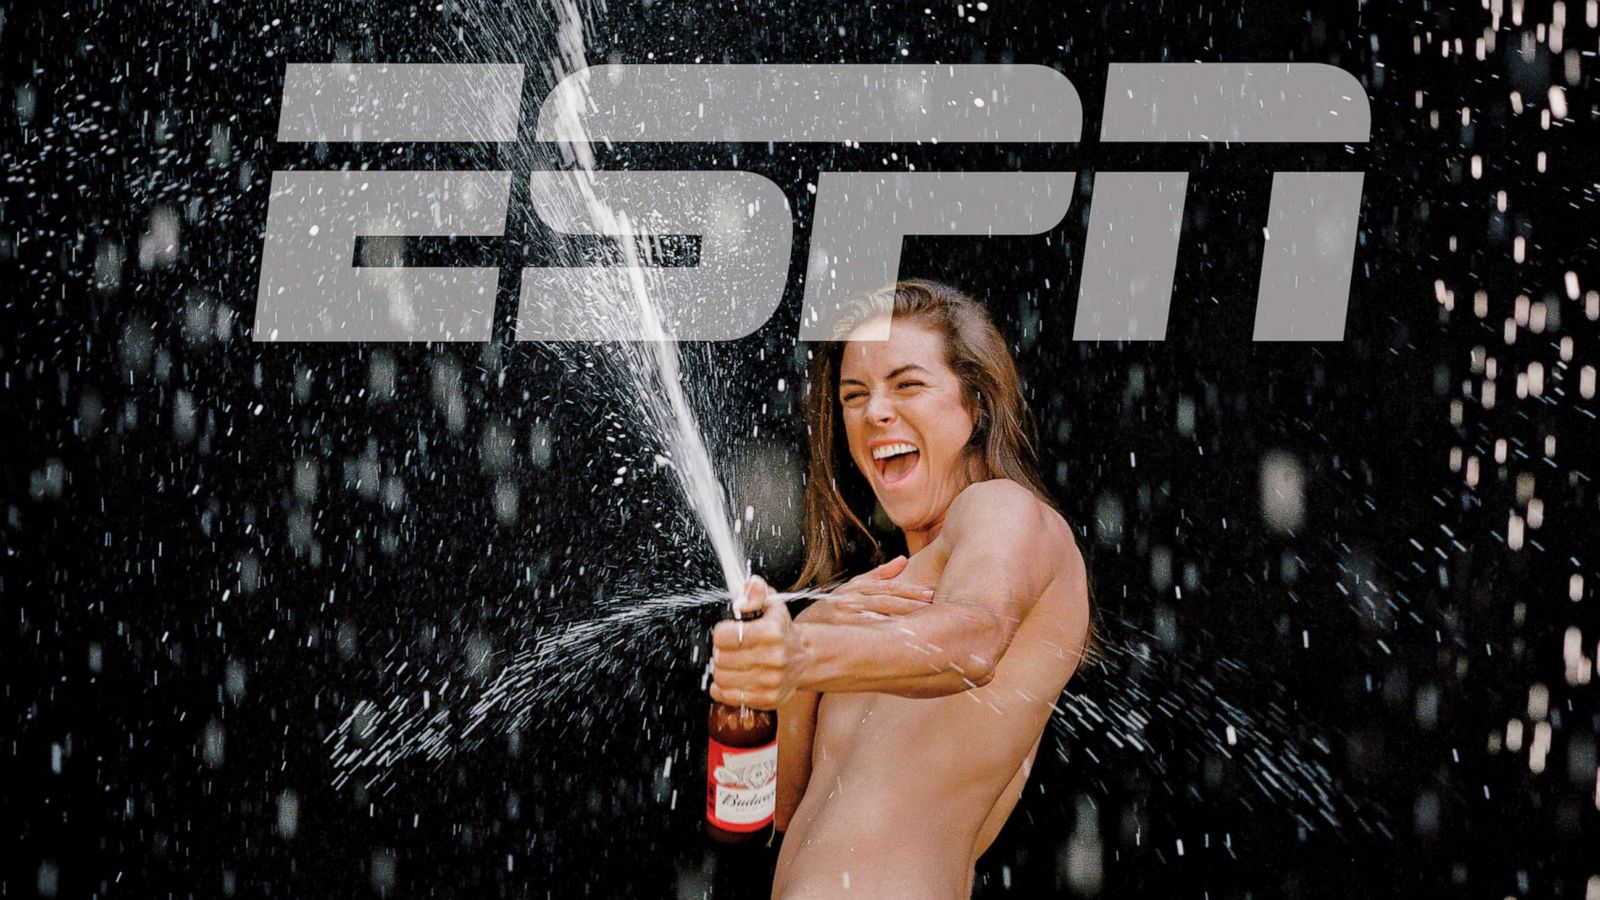 ESPN Body Issue: All 21 athletes photographed for edition